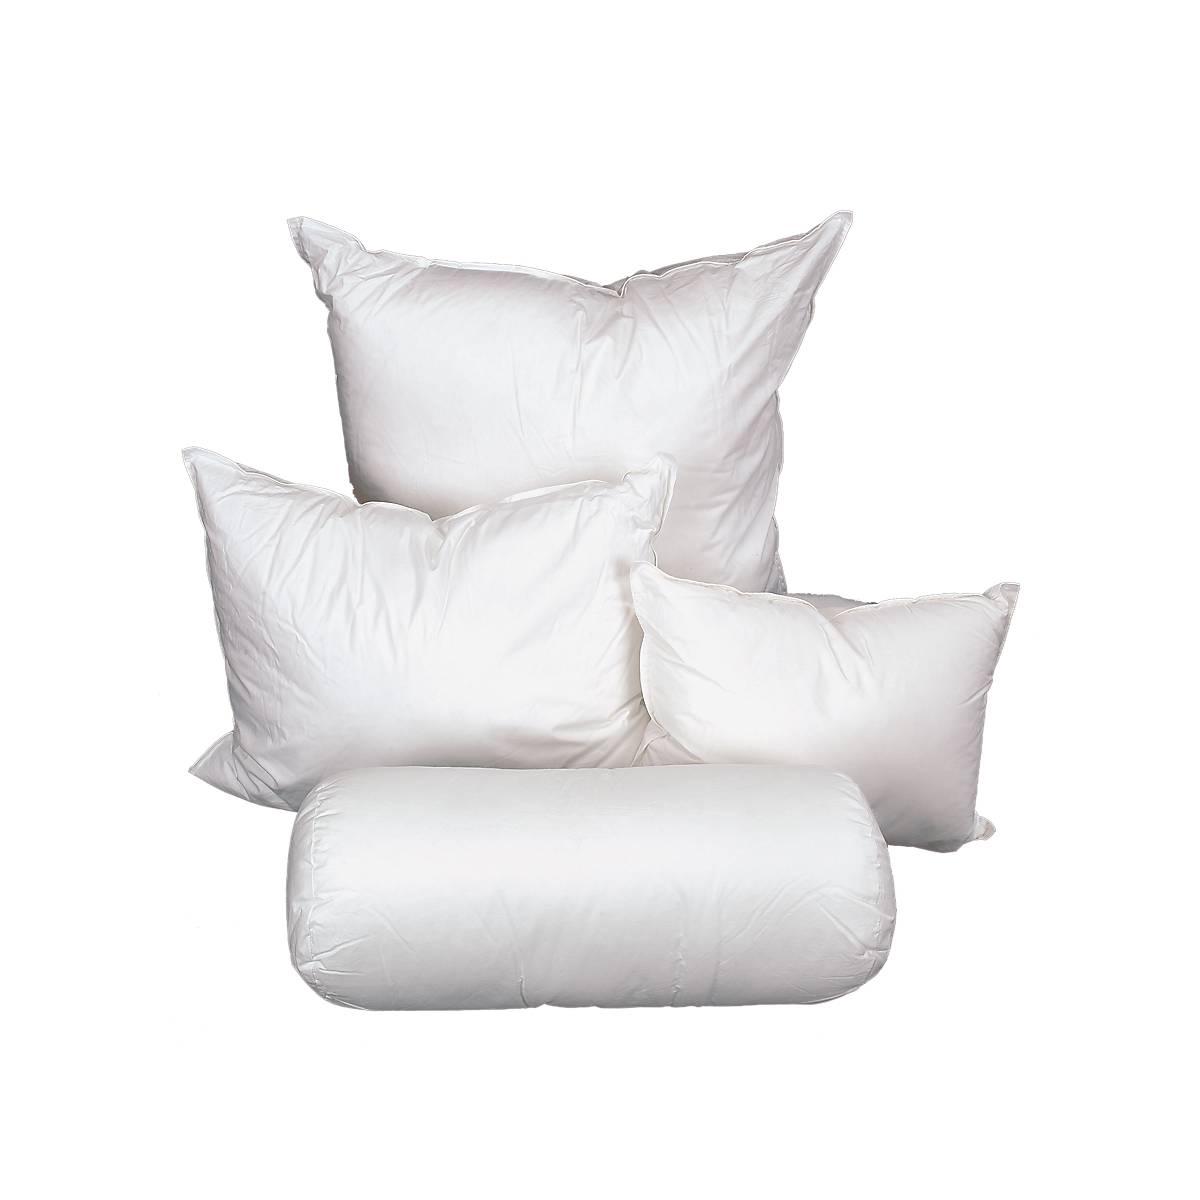 https://rowleycompany.scene7.com/is/image/rowleycompany/rowley-r-tex-high-quality-polyester-cluster-pillow-inserts-pjpcweb?$s7Product$